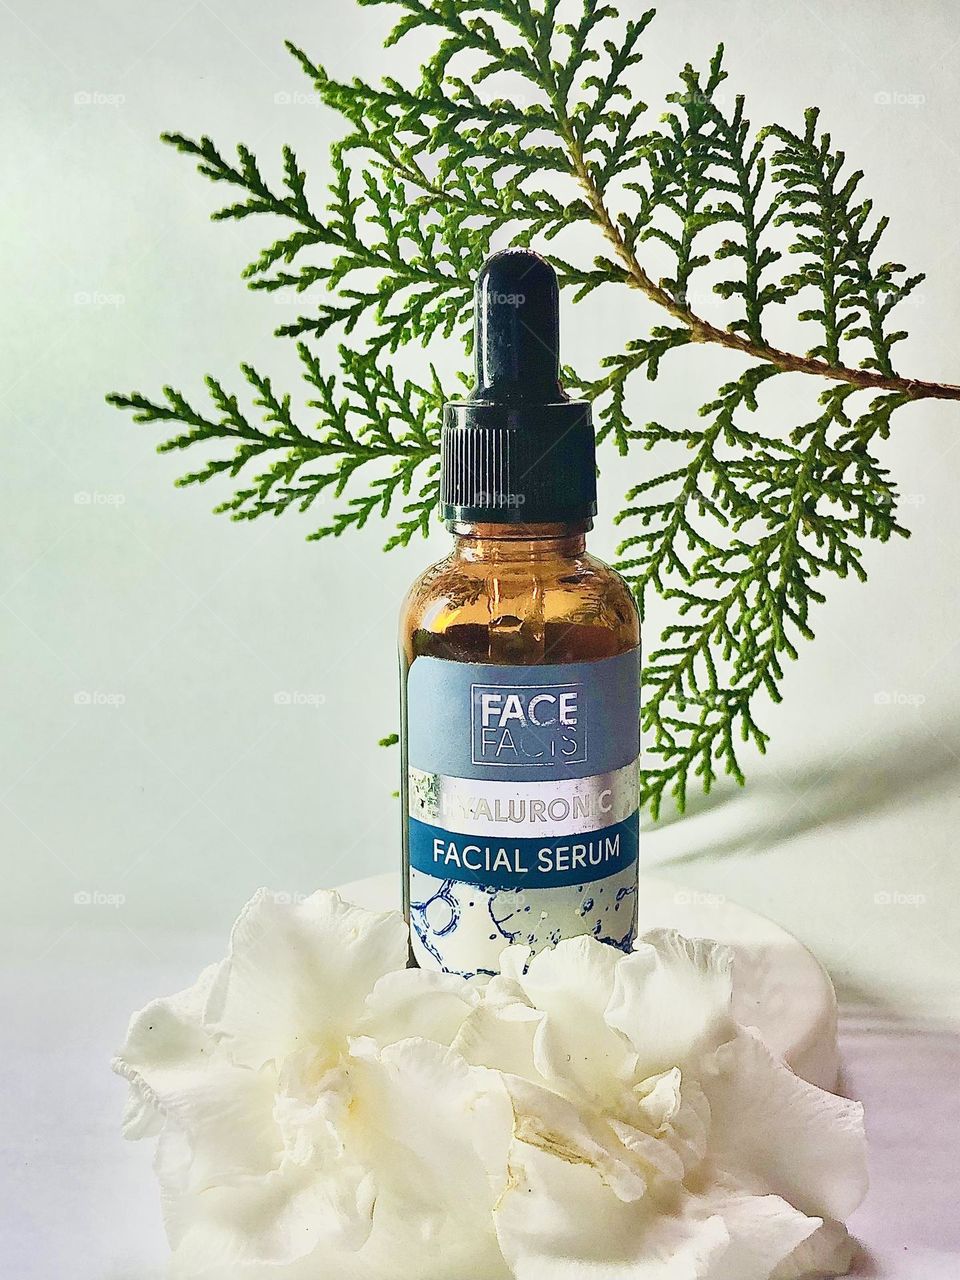 Face serum picture with white and green drops 